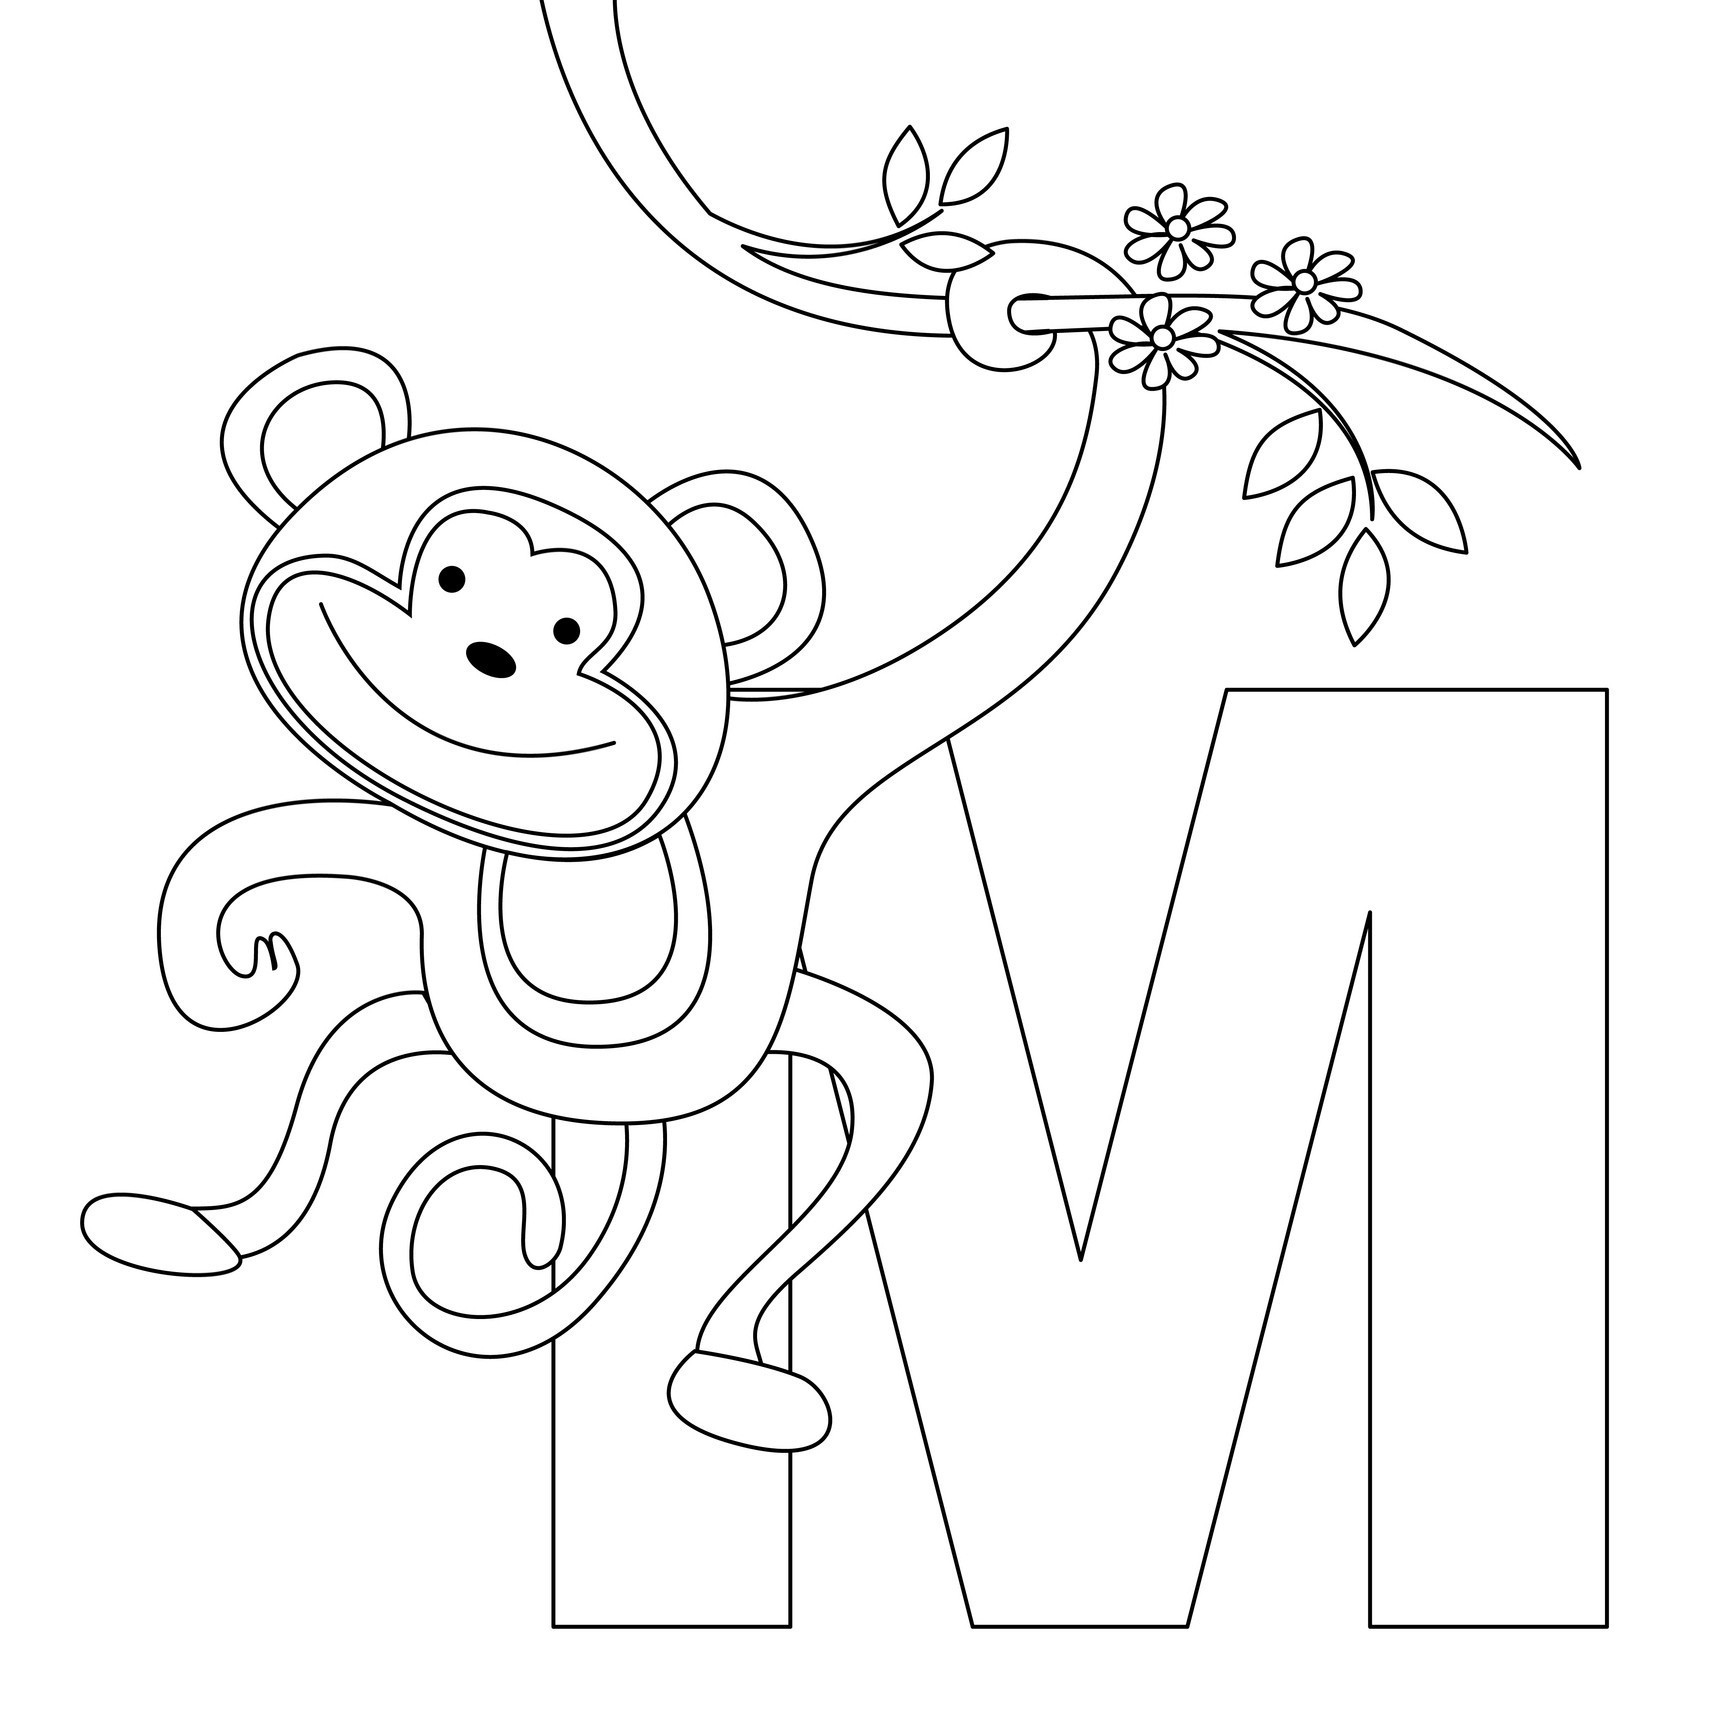 Monkey Printable Coloring Pages
 Free Printable Monkey Coloring Pages For Kids